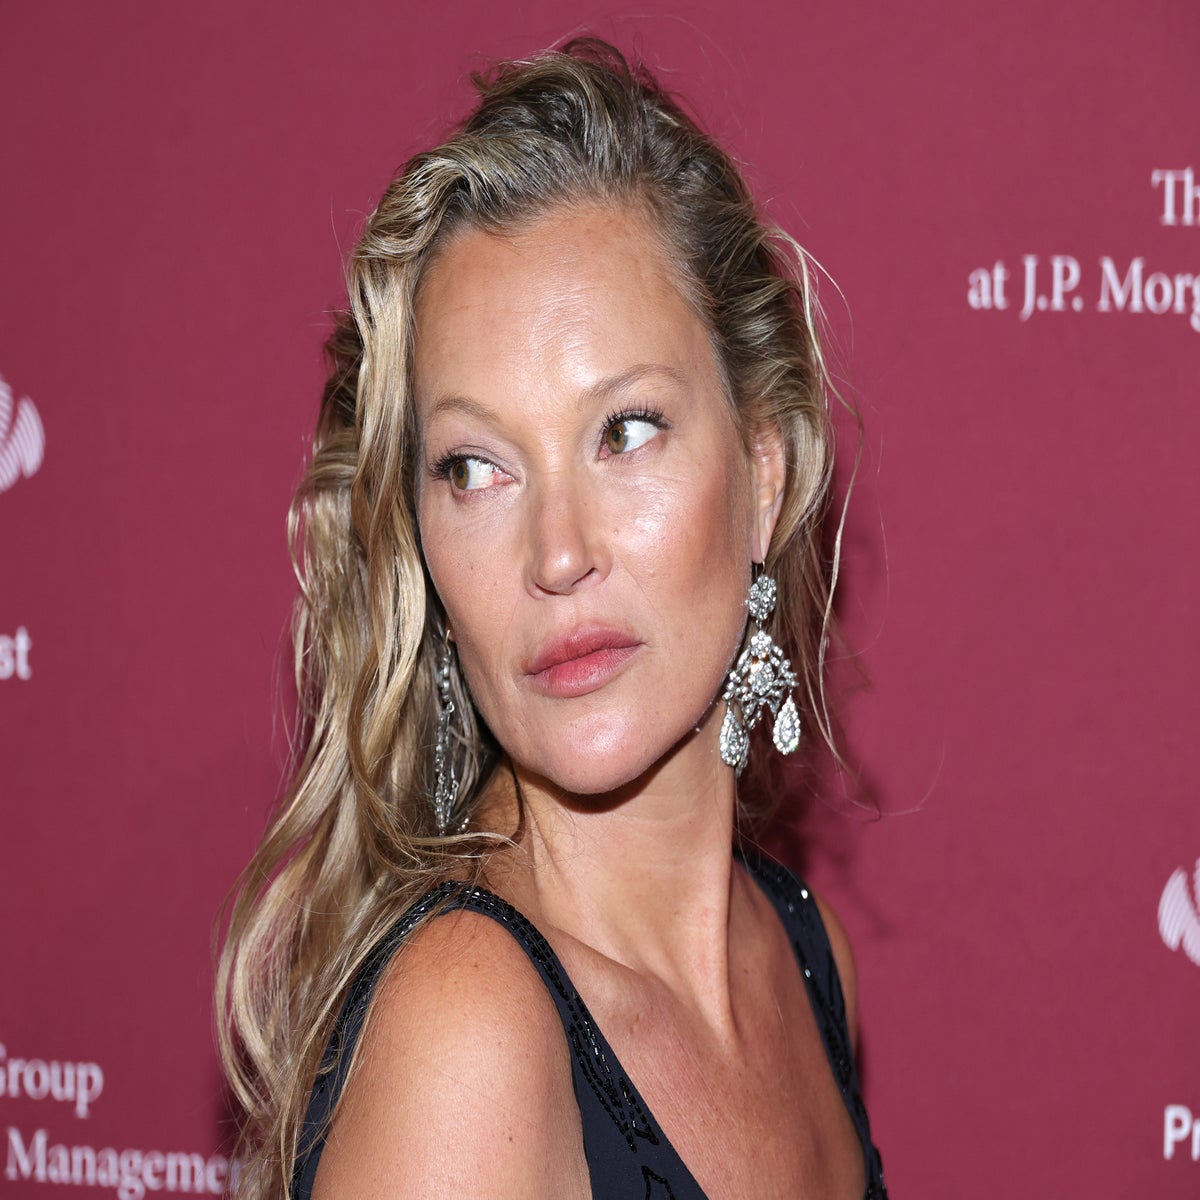 Kate Moss says she was 'vulnerable and scared' during 1992 Calvin Klein  photoshoot with Mark Wahlberg | The Independent